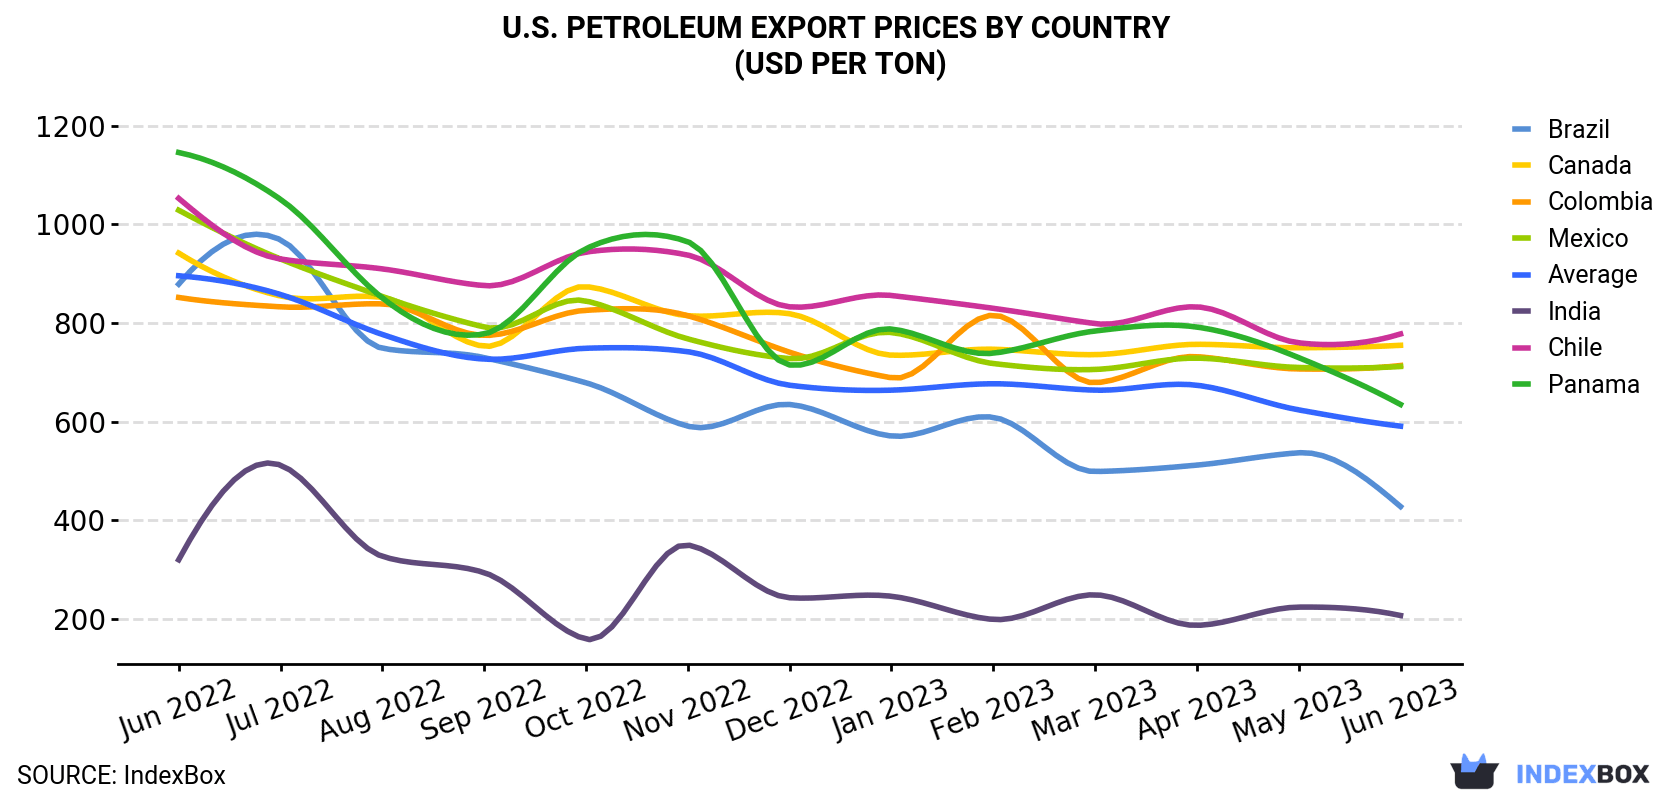 U.S. Petroleum Export Prices By Country (USD Per Ton)